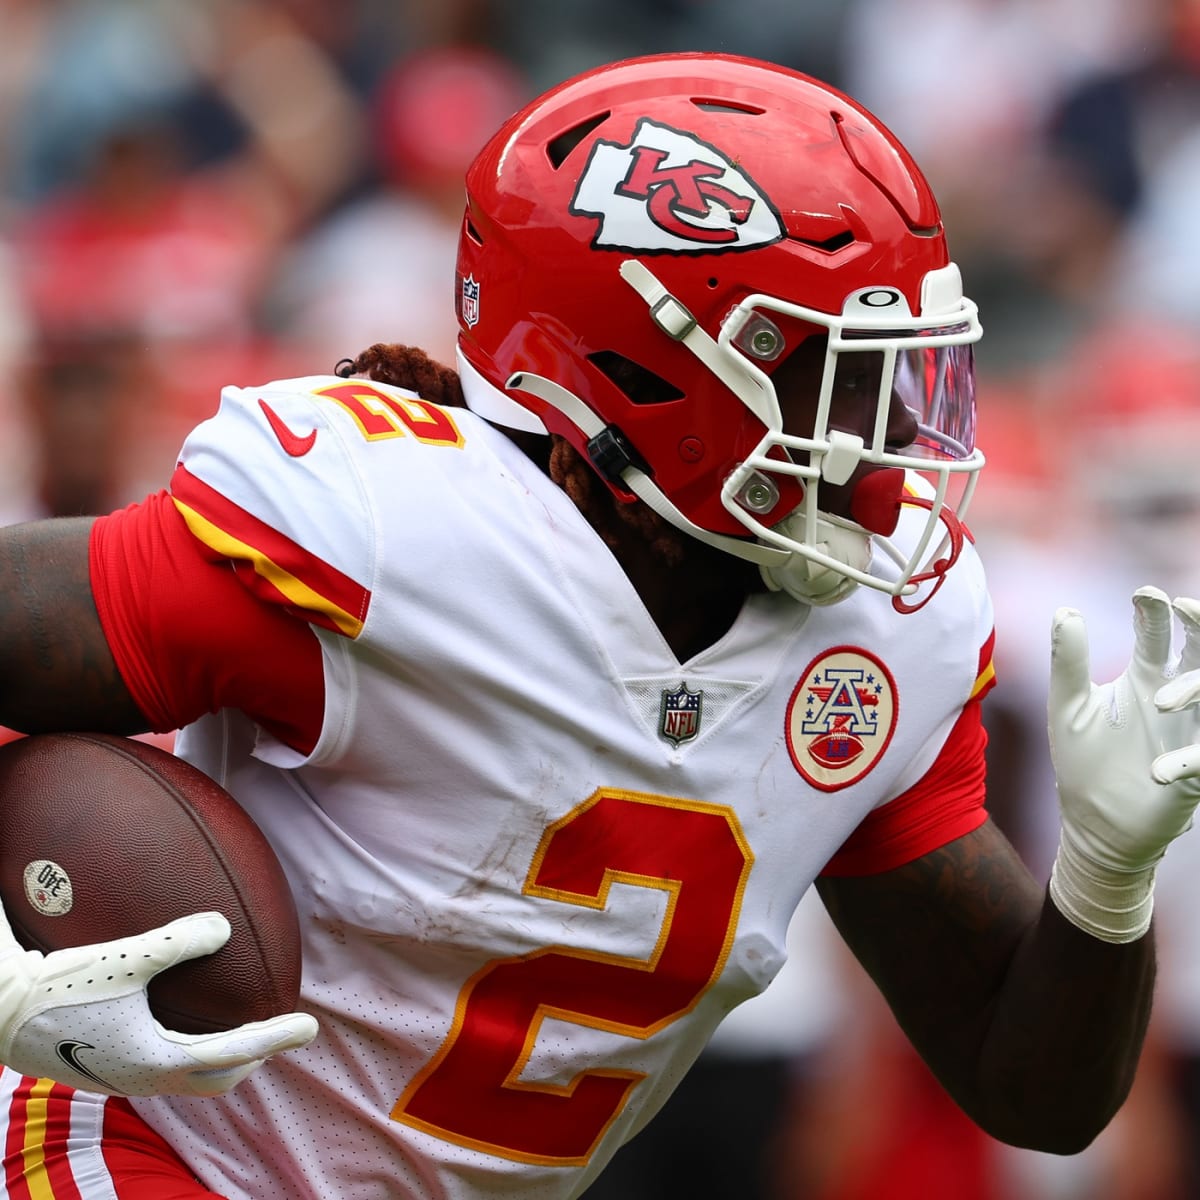 Chiefs preseason star traded to Carolina Panthers for conditional